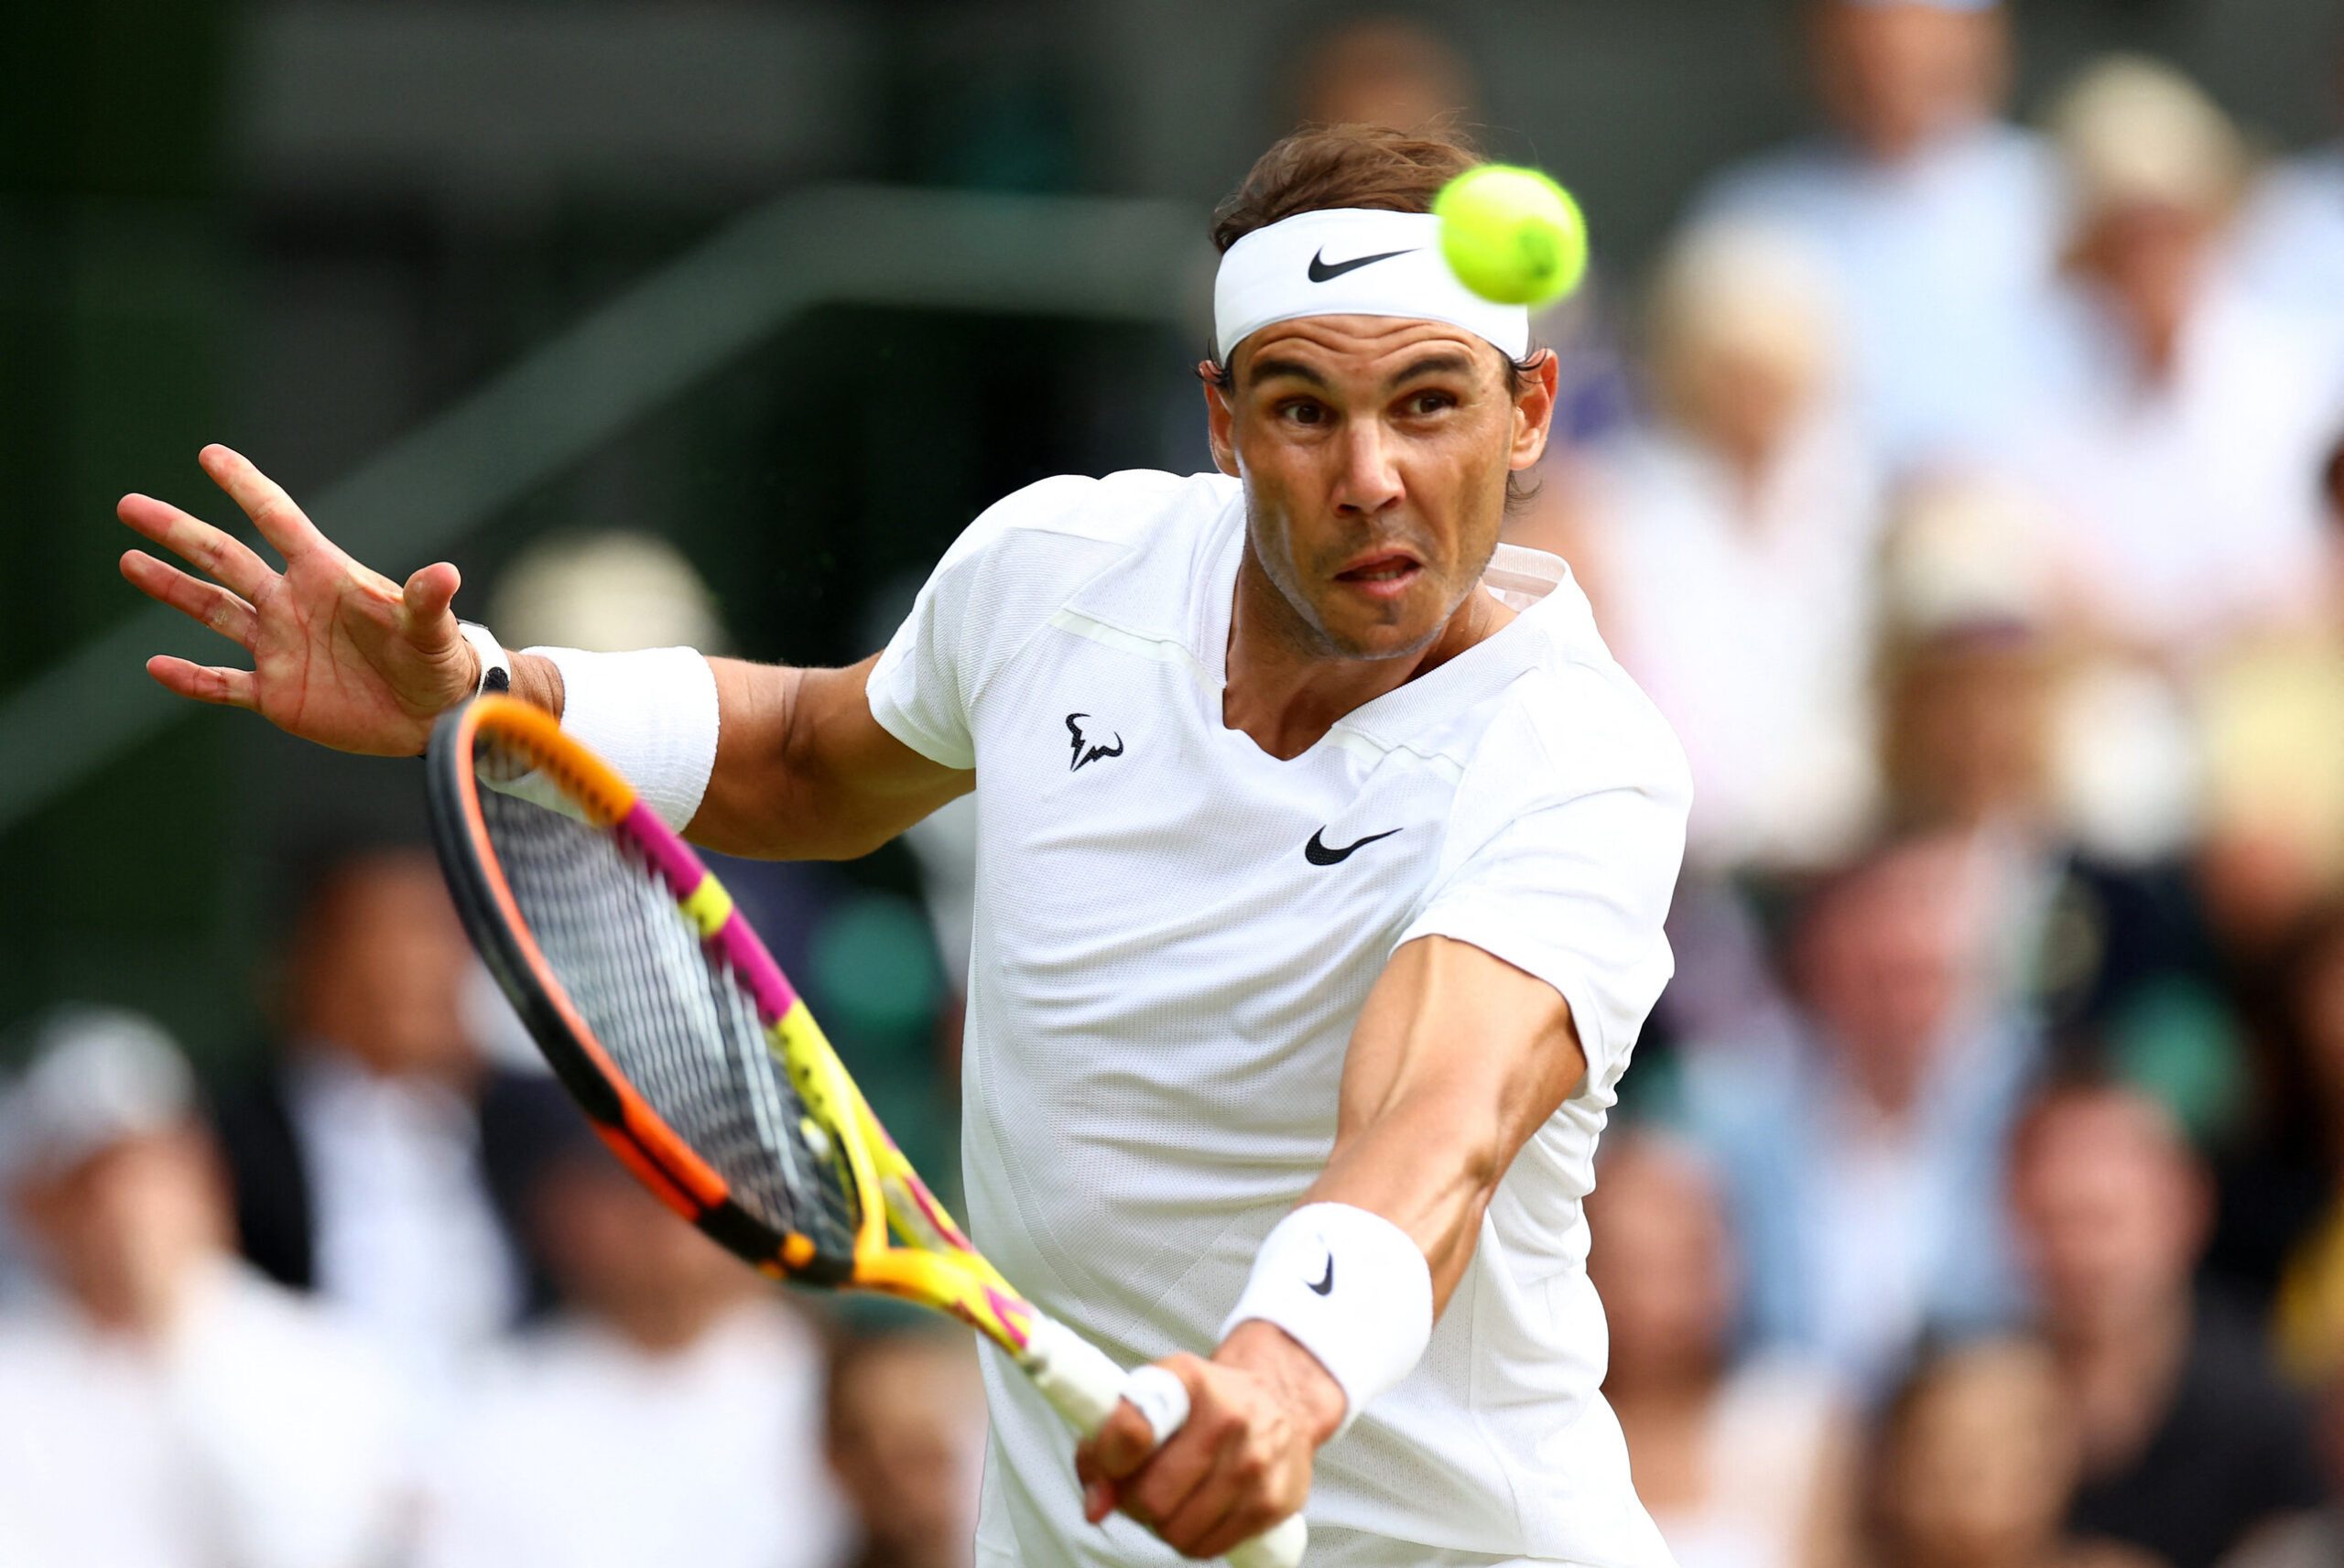 Ailing Nadal finds mental steel to edge Fritz in Wimbledon epic